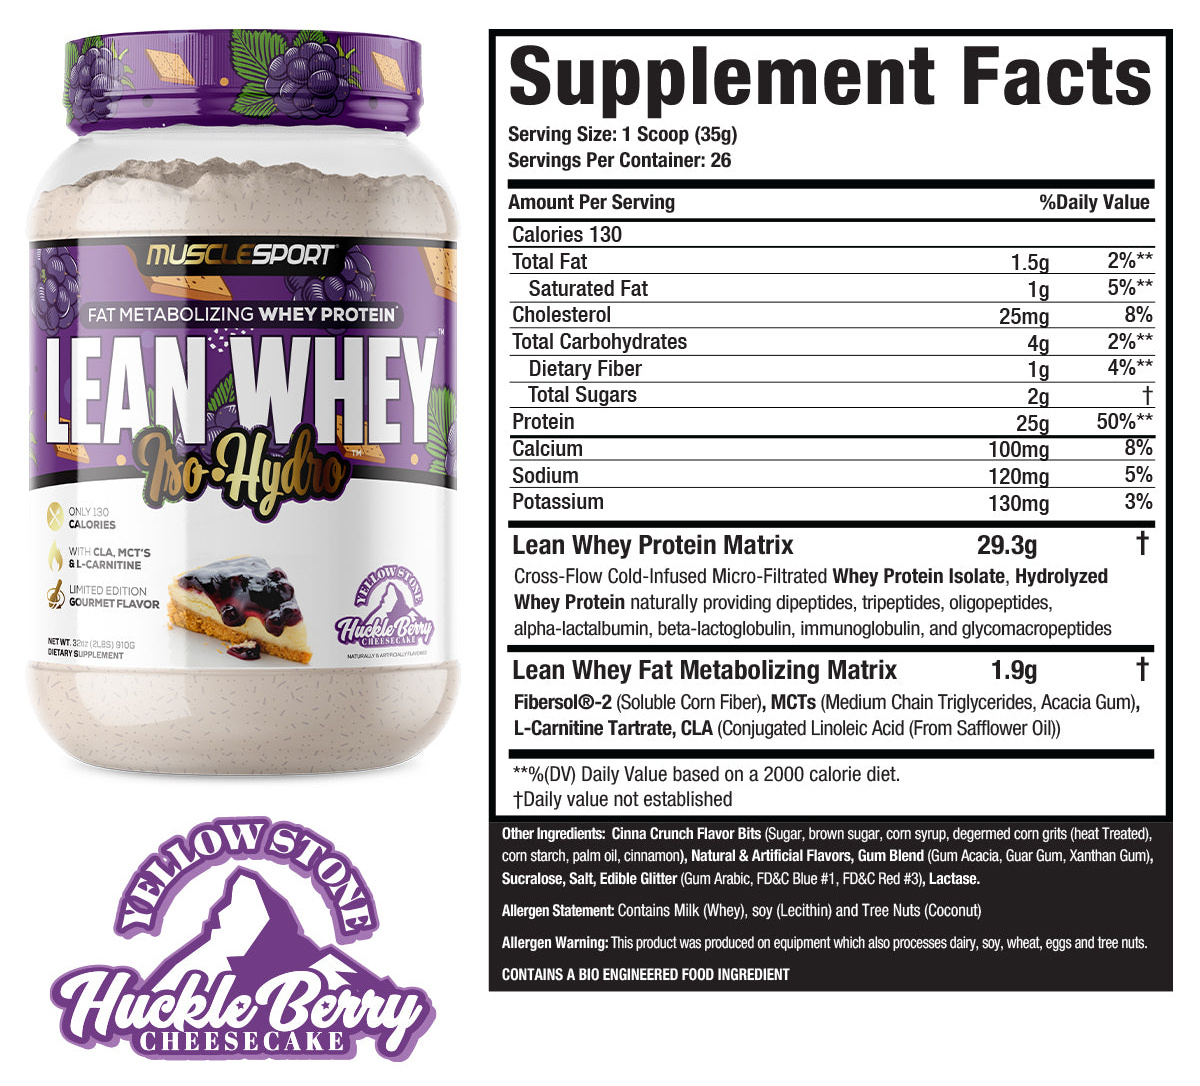 Musclesport Lean Whey Yellowstone Huckleberry Cheesecake Ingredients & Nutrition Facts